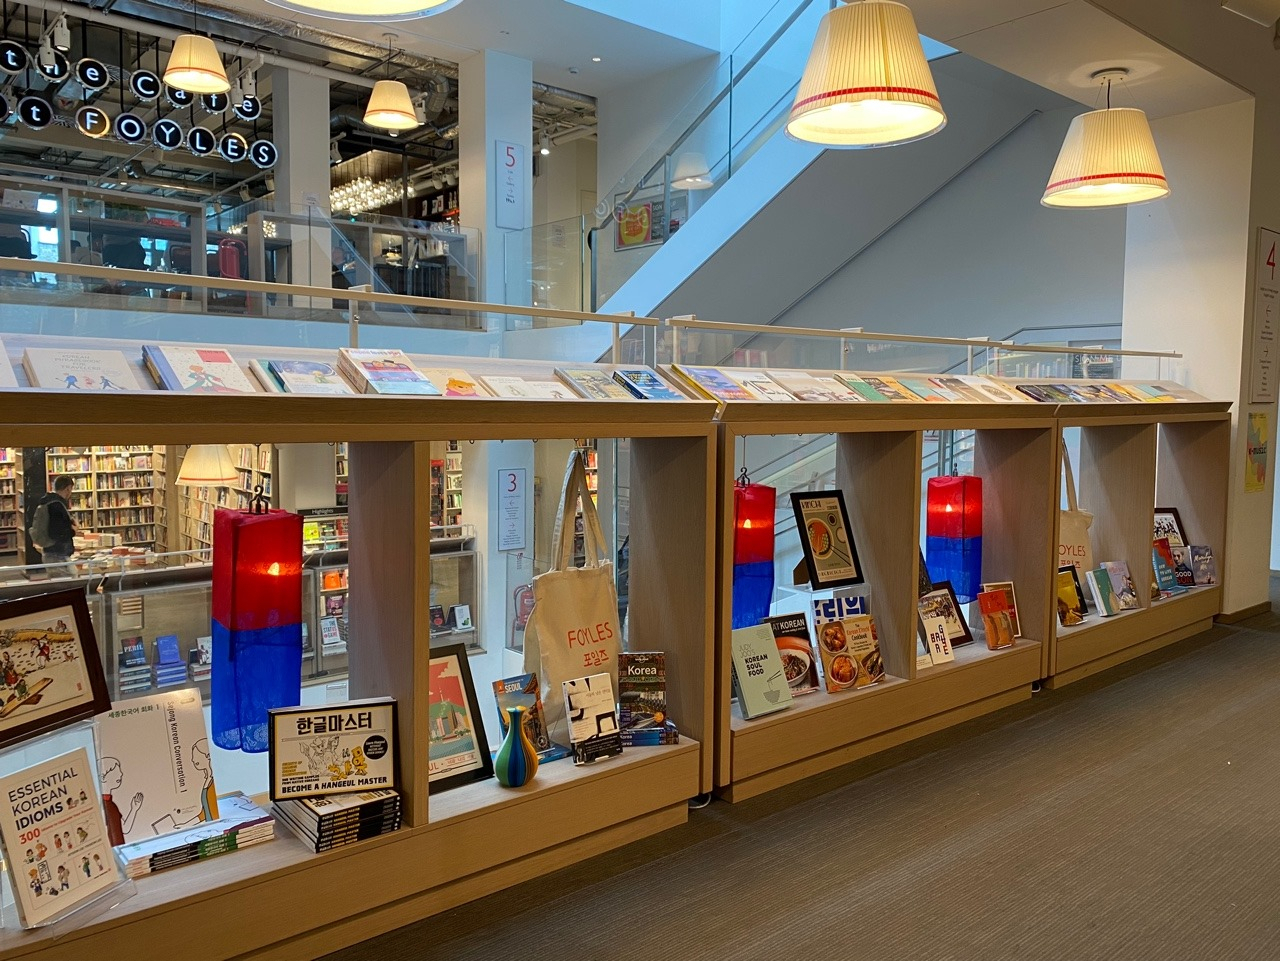 Korean books are on display at Foyles bookstore in London during last year's 